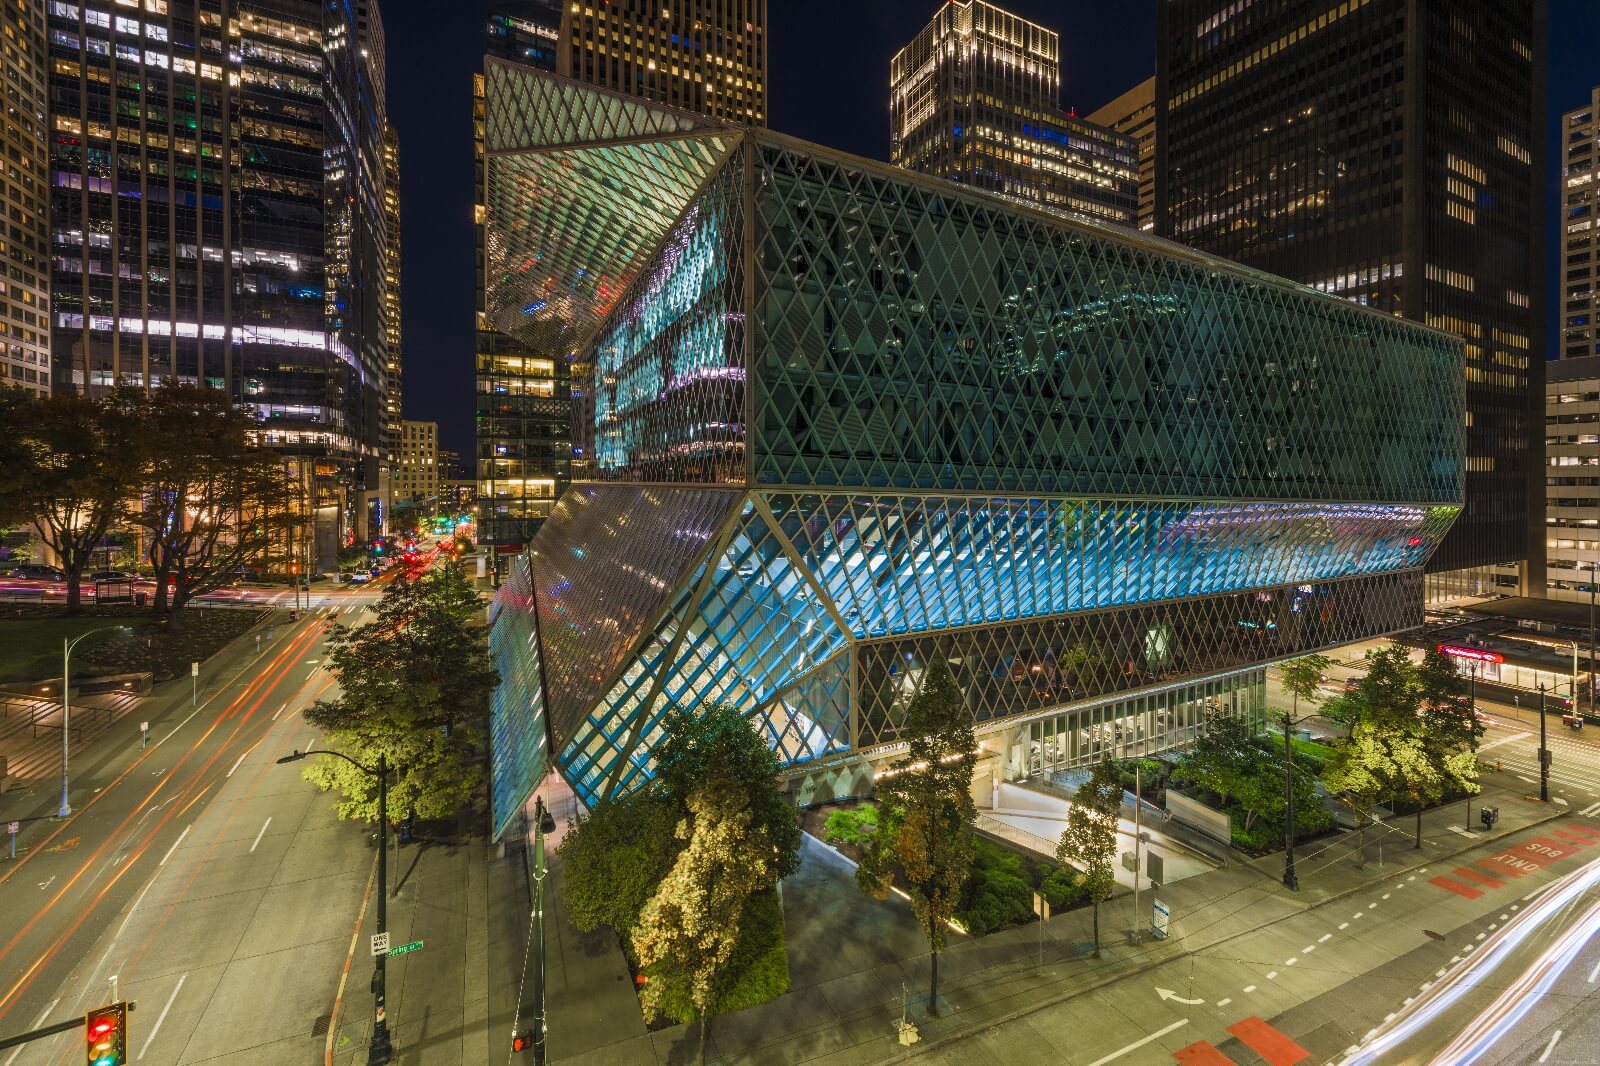 Image of Seattle Central Library by Enrico Pozzo